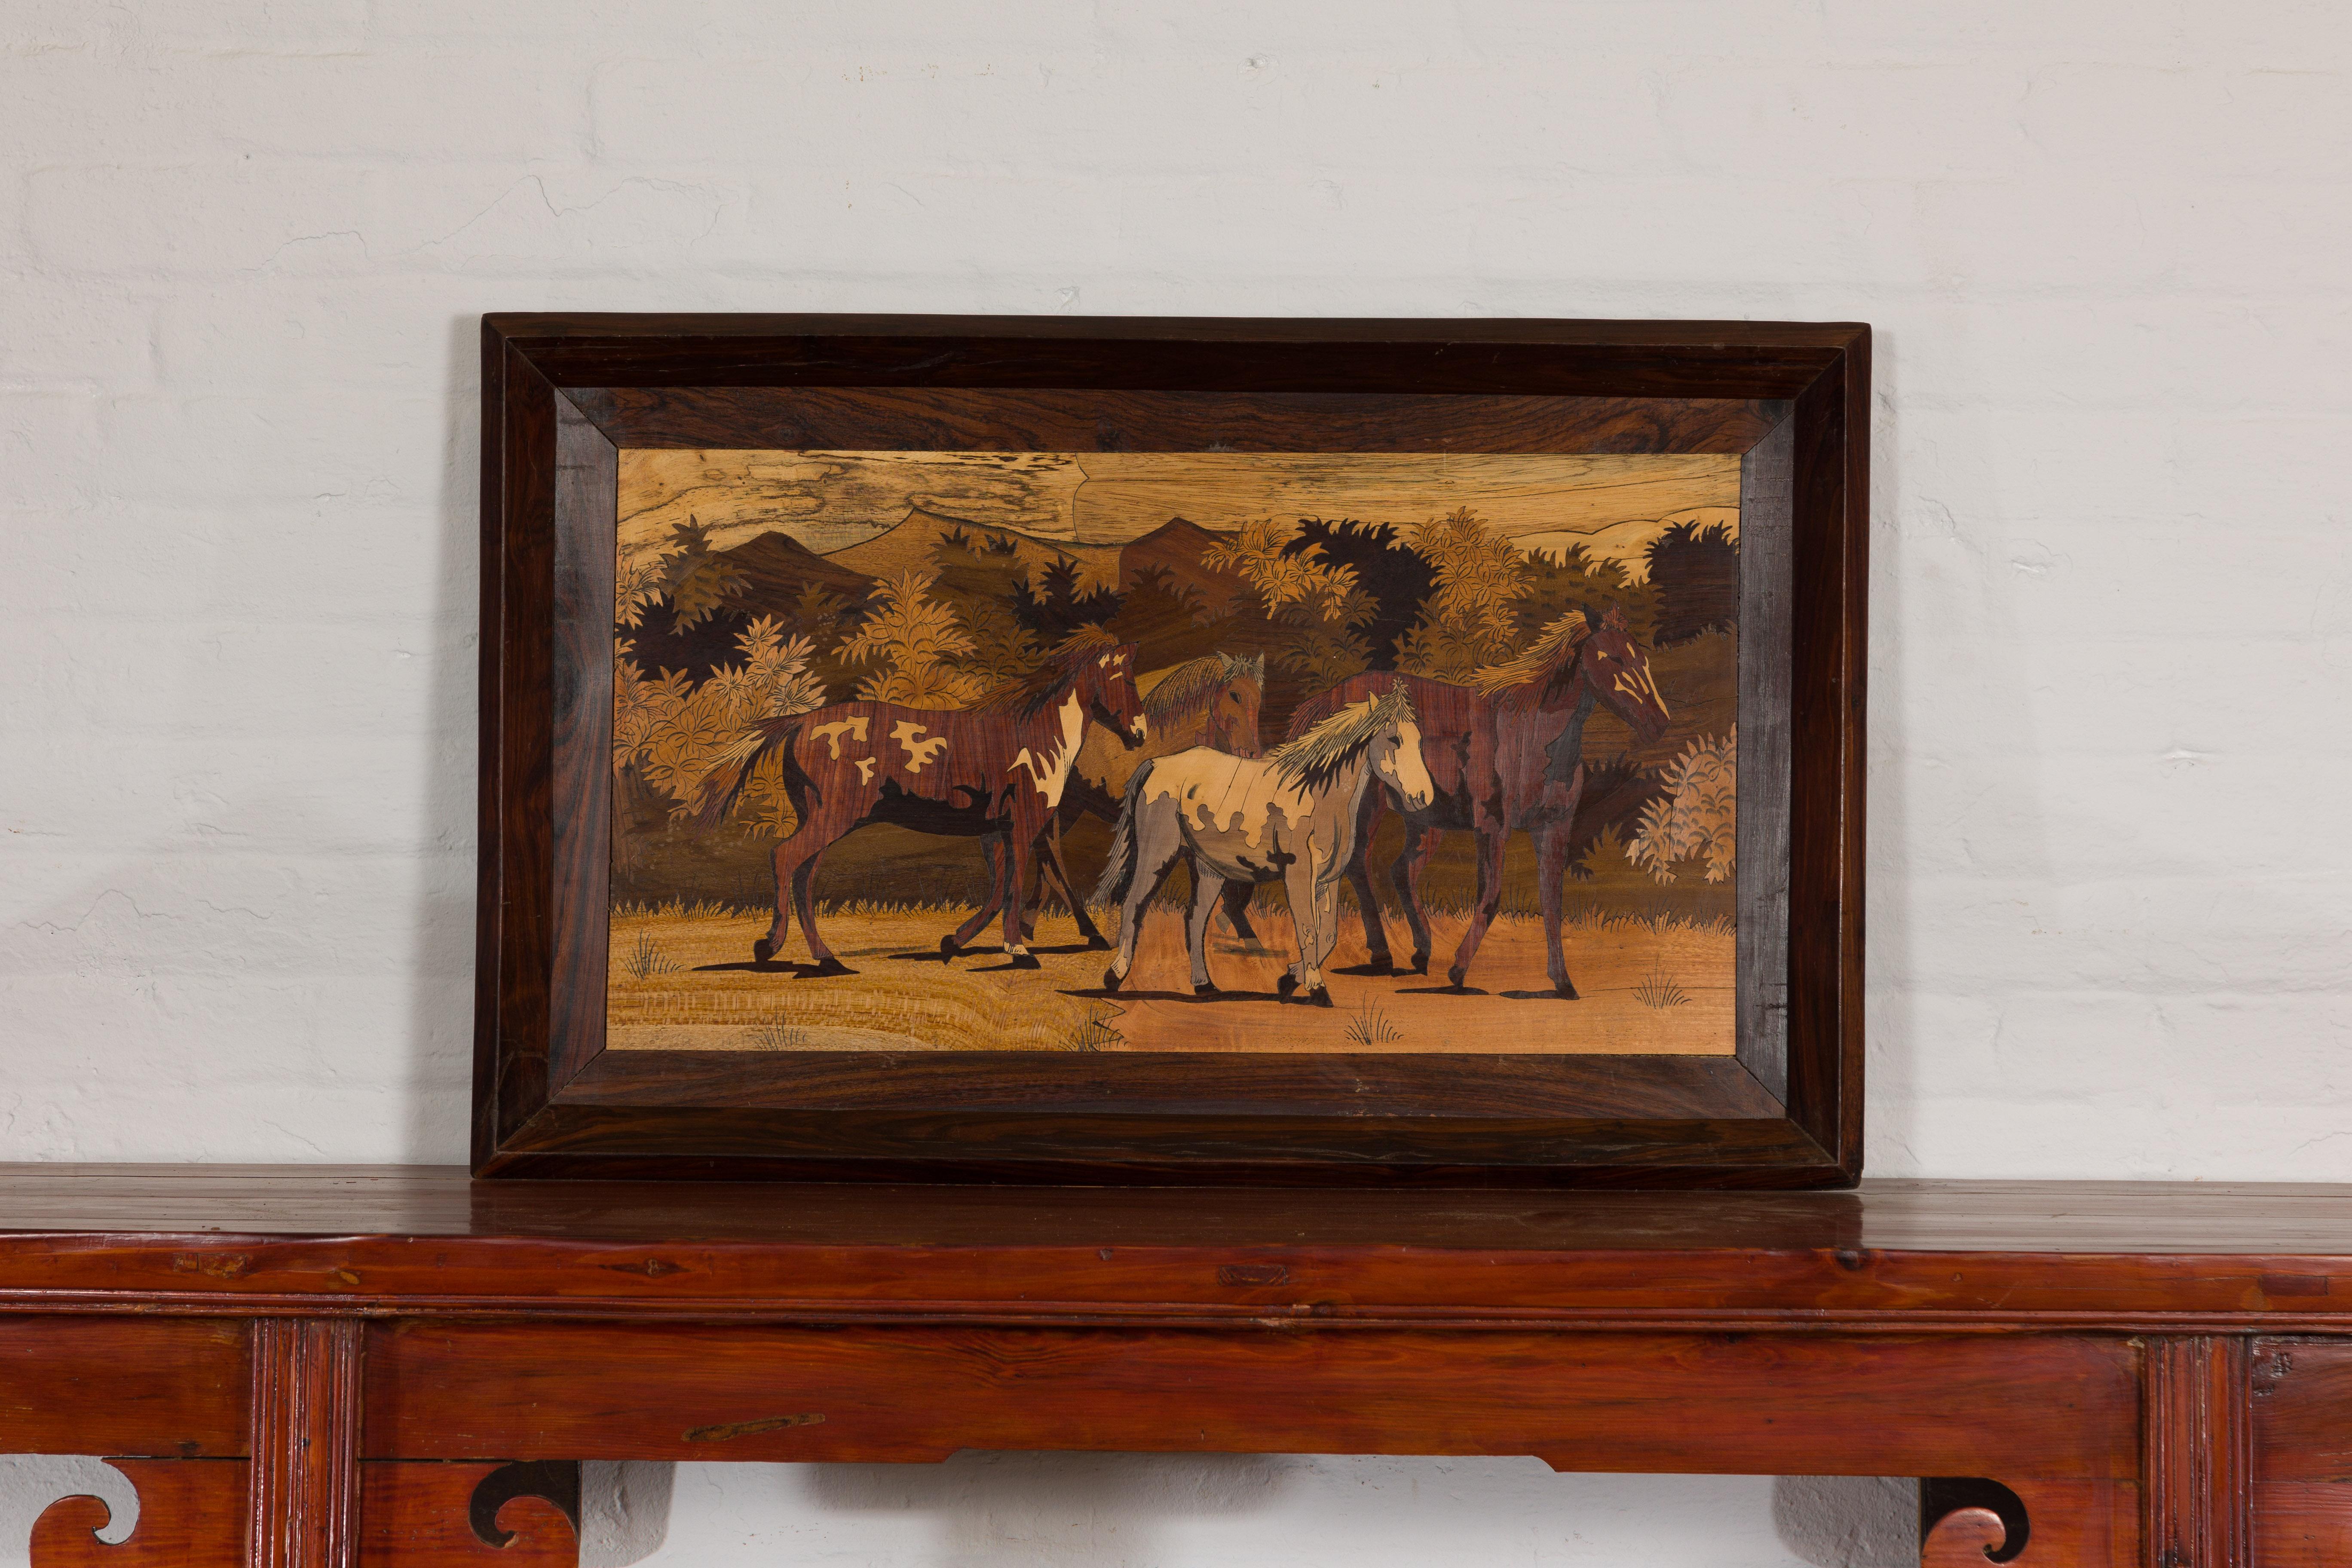 A vintage framed inlaid wood painting depicting four horses in a landscape in simple wooden frame. Experience the timeless beauty of this vintage framed inlaid wood painting. This captivating piece, illustrating four horses in a serene landscape, is